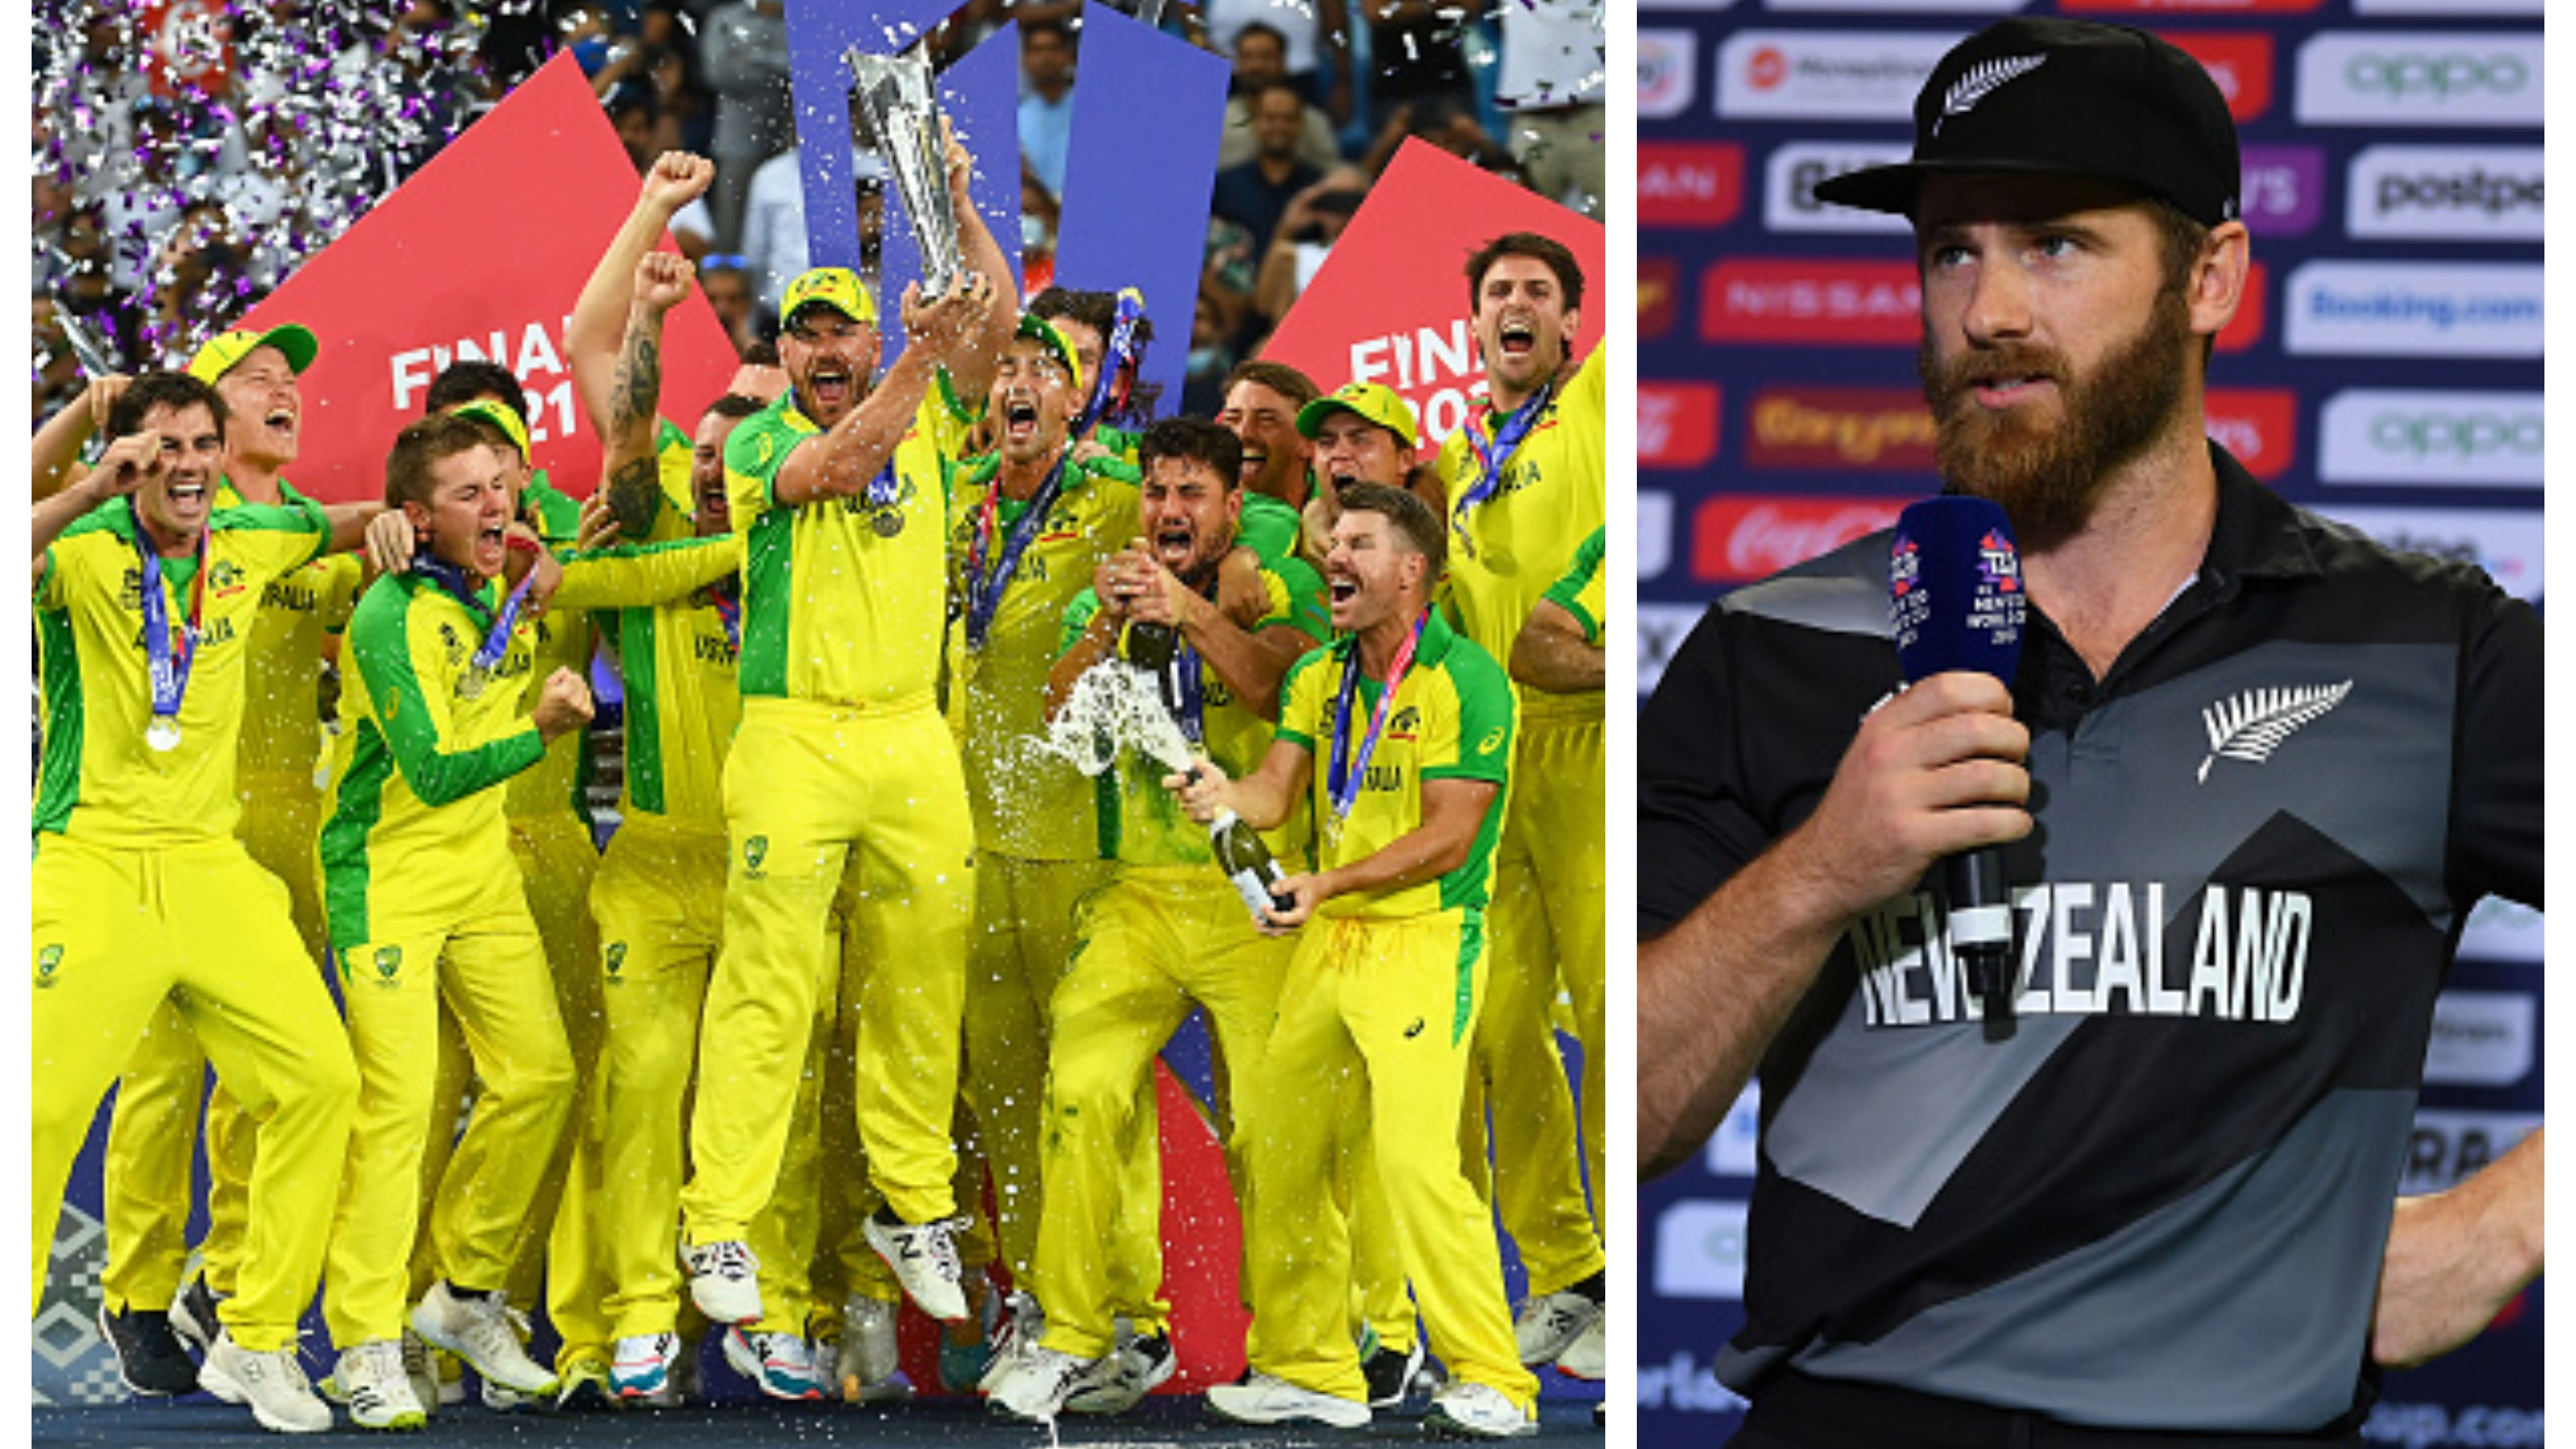 T20 World Cup 2021: Williamson feels Kiwis posted competitive total in final, credits Australia for superb chase